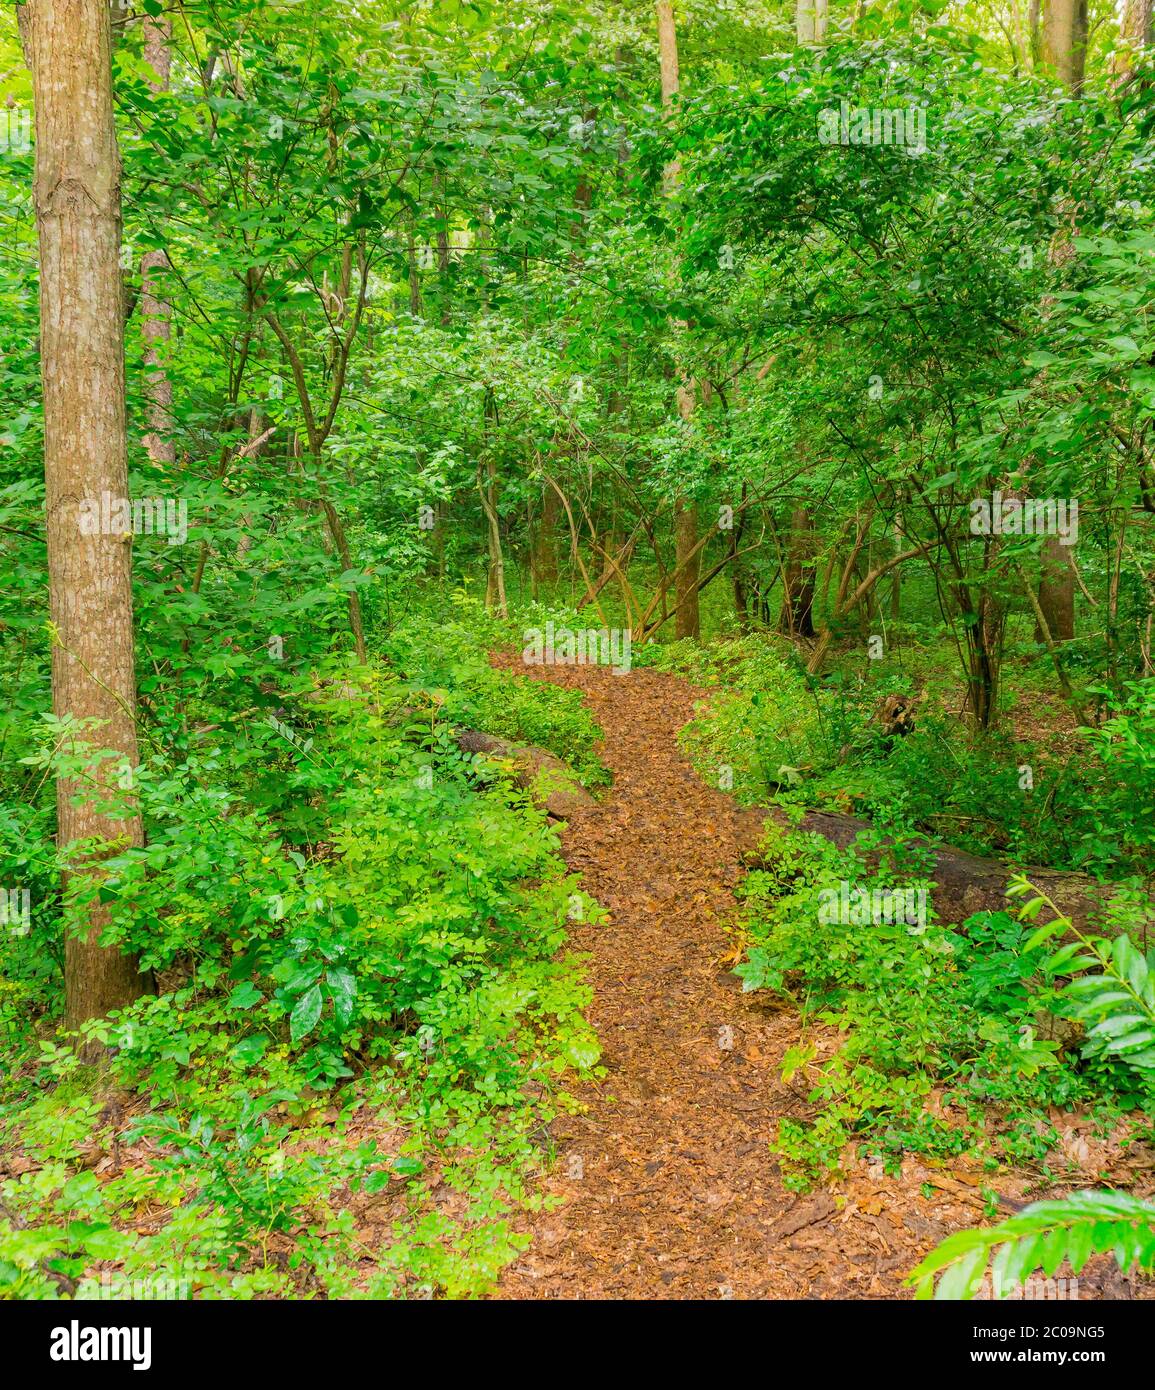 A  path leads through a forest in Michigan, USA. The deep forest just gives you a hint of the path ahead. Stock Photo